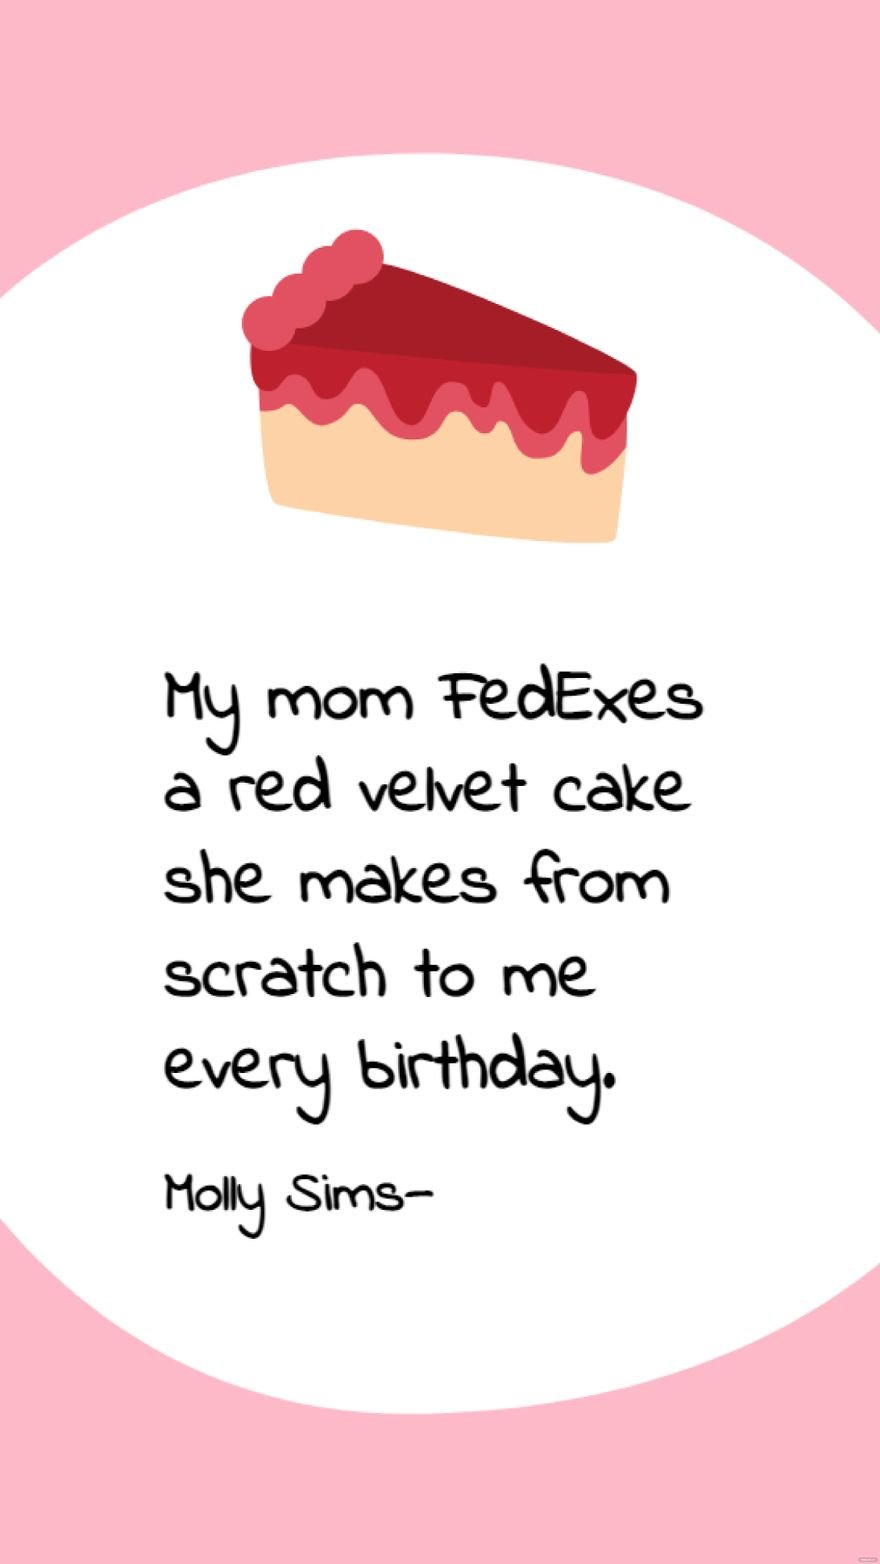 Molly Sims - My mom FedExes a red velvet cake she makes from scratch to me every birthday. in JPG